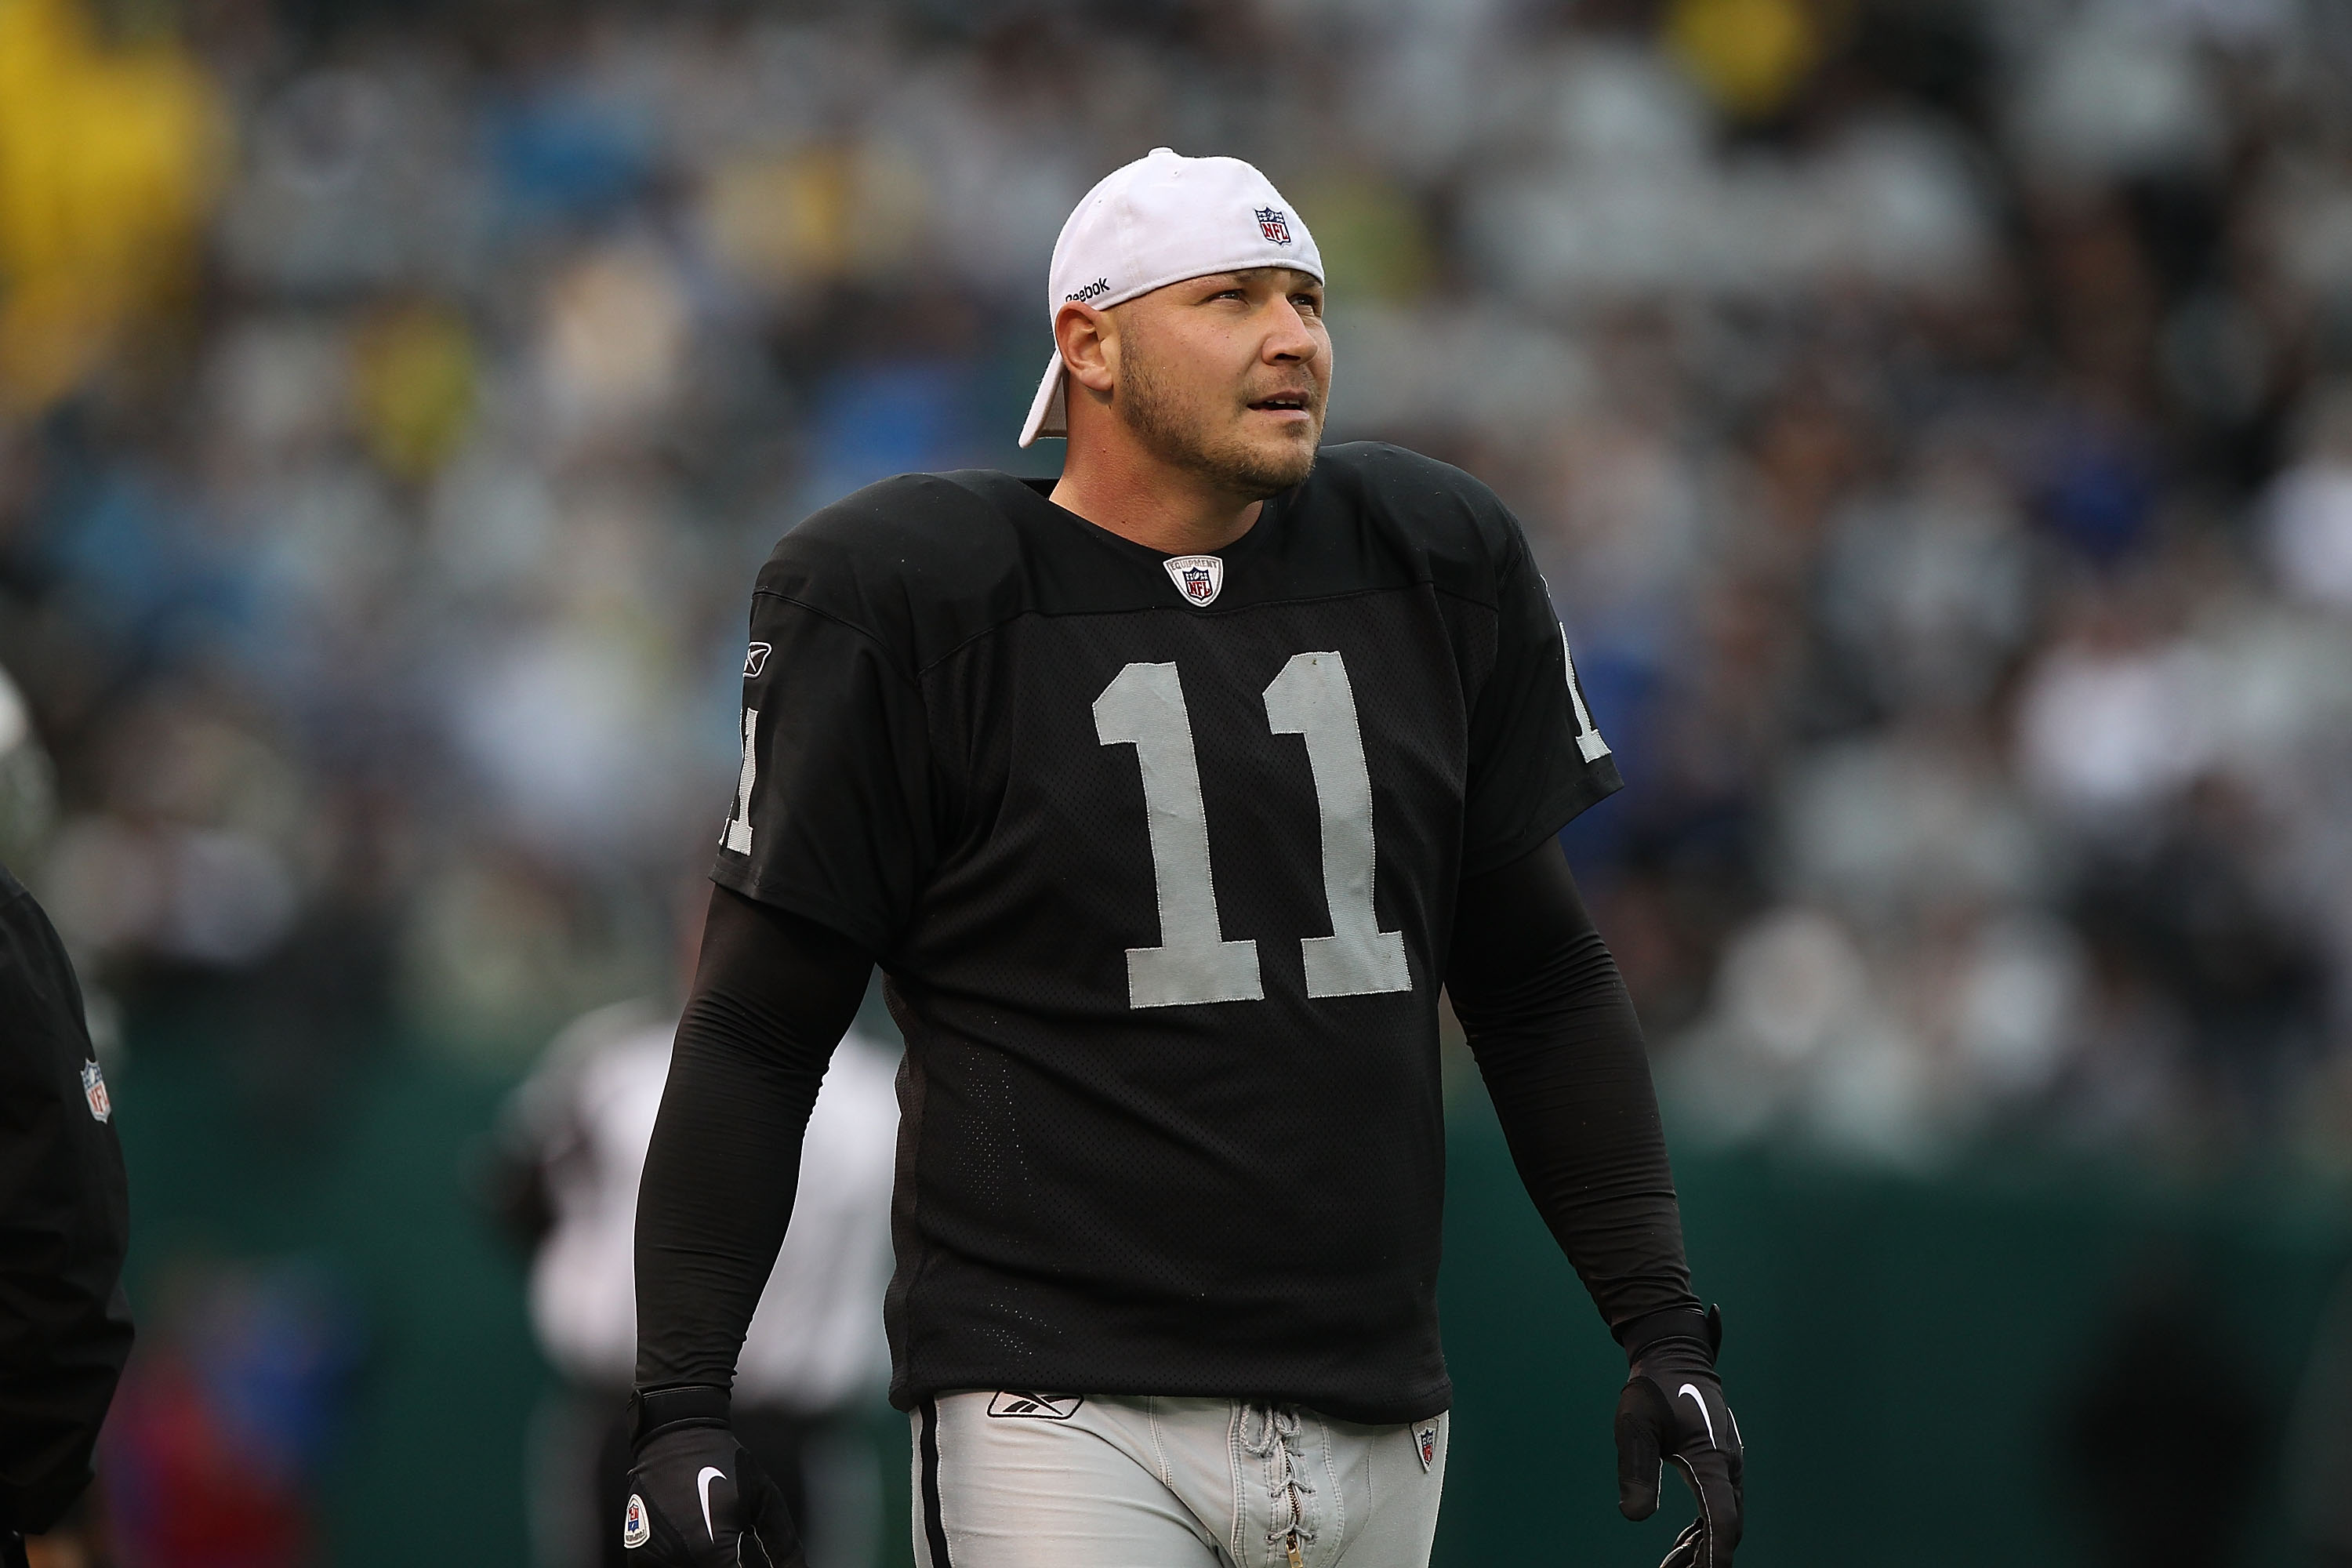 OAKLAND, CA - NOVEMBER 07:  Sebastian Janikowski #11 of the Oakland Raiders looks on against the Kansas City Chiefs during an NFL game at Oakland-Alameda County Coliseum on November 7, 2010 in Oakland, California.  (Photo by Jed Jacobsohn/Getty Images)